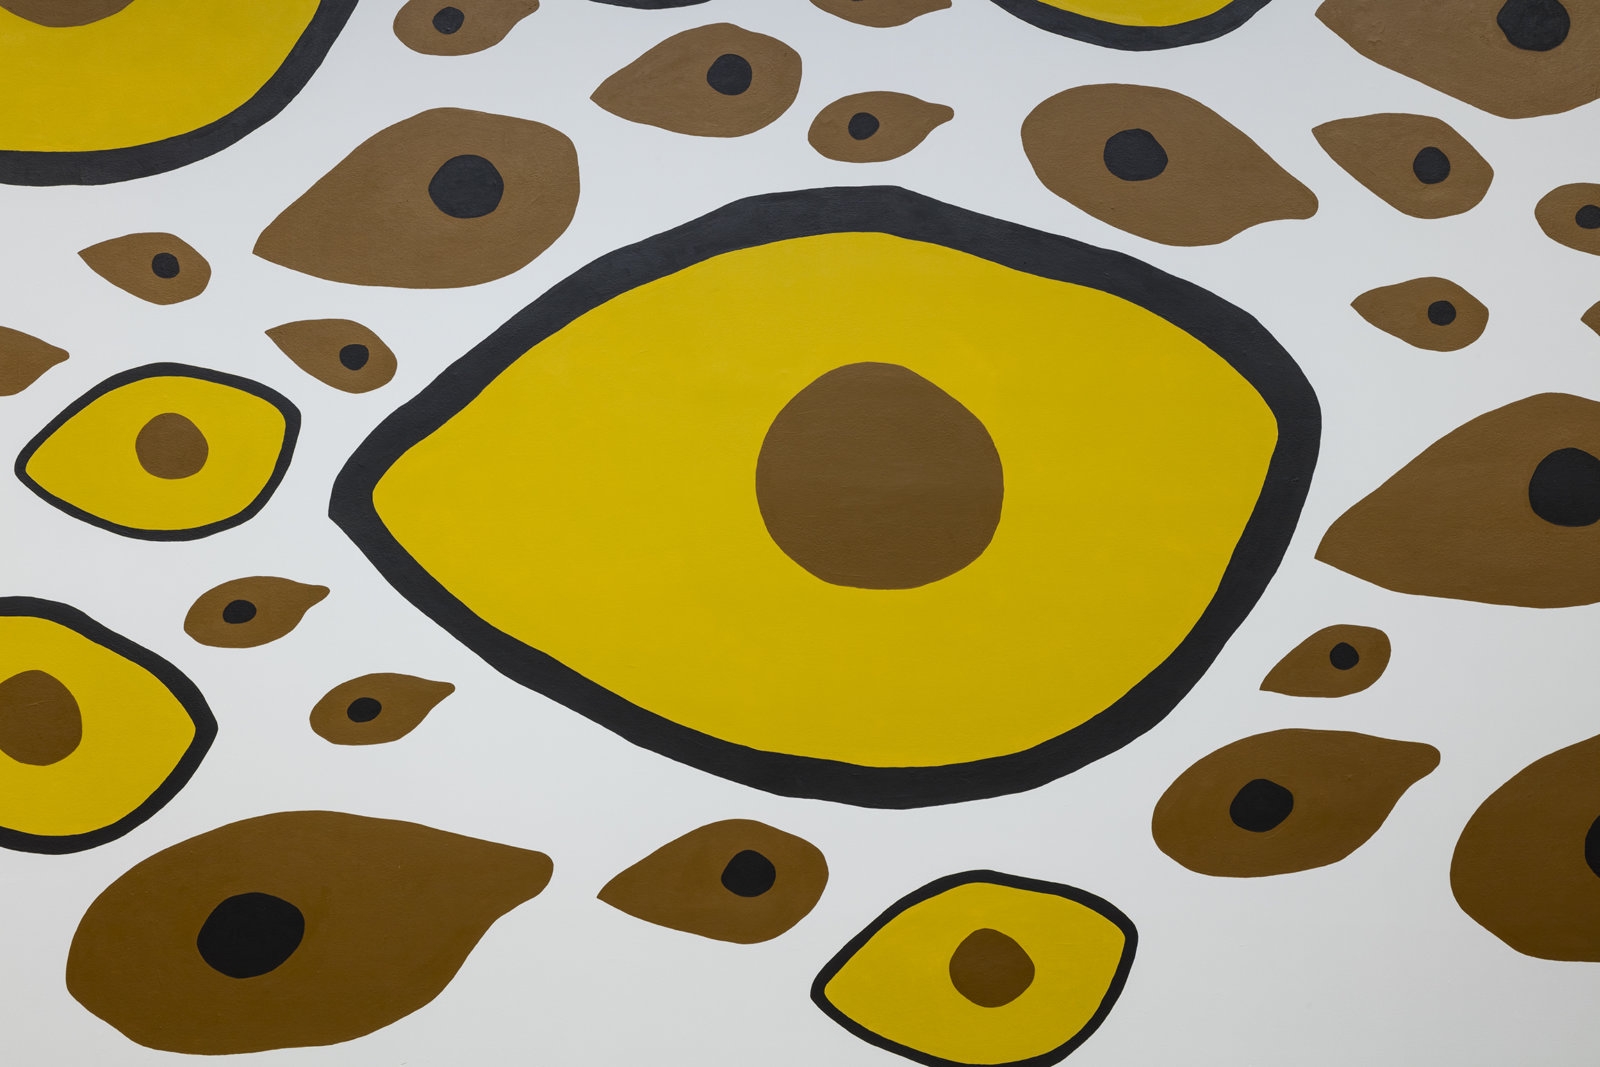 Duane Linklater, Earth Mother Hair, Indian Hair, and Earth Mother Eyes, Indian Eyes, Animal Eyes (detail), 2017, paint on interior wall of the Musée d’art contemporain de Montréal, from a series of small paintings of eyes and hair based on a photo of Norval Morrisseau’s Earth Mother and Her Children (1967), painting labour by Julie Ouellet, absence of the artist, dimensions variable. Installation view, In Search of Expo 67, Musée d’art contemporain de Montréal, 2017